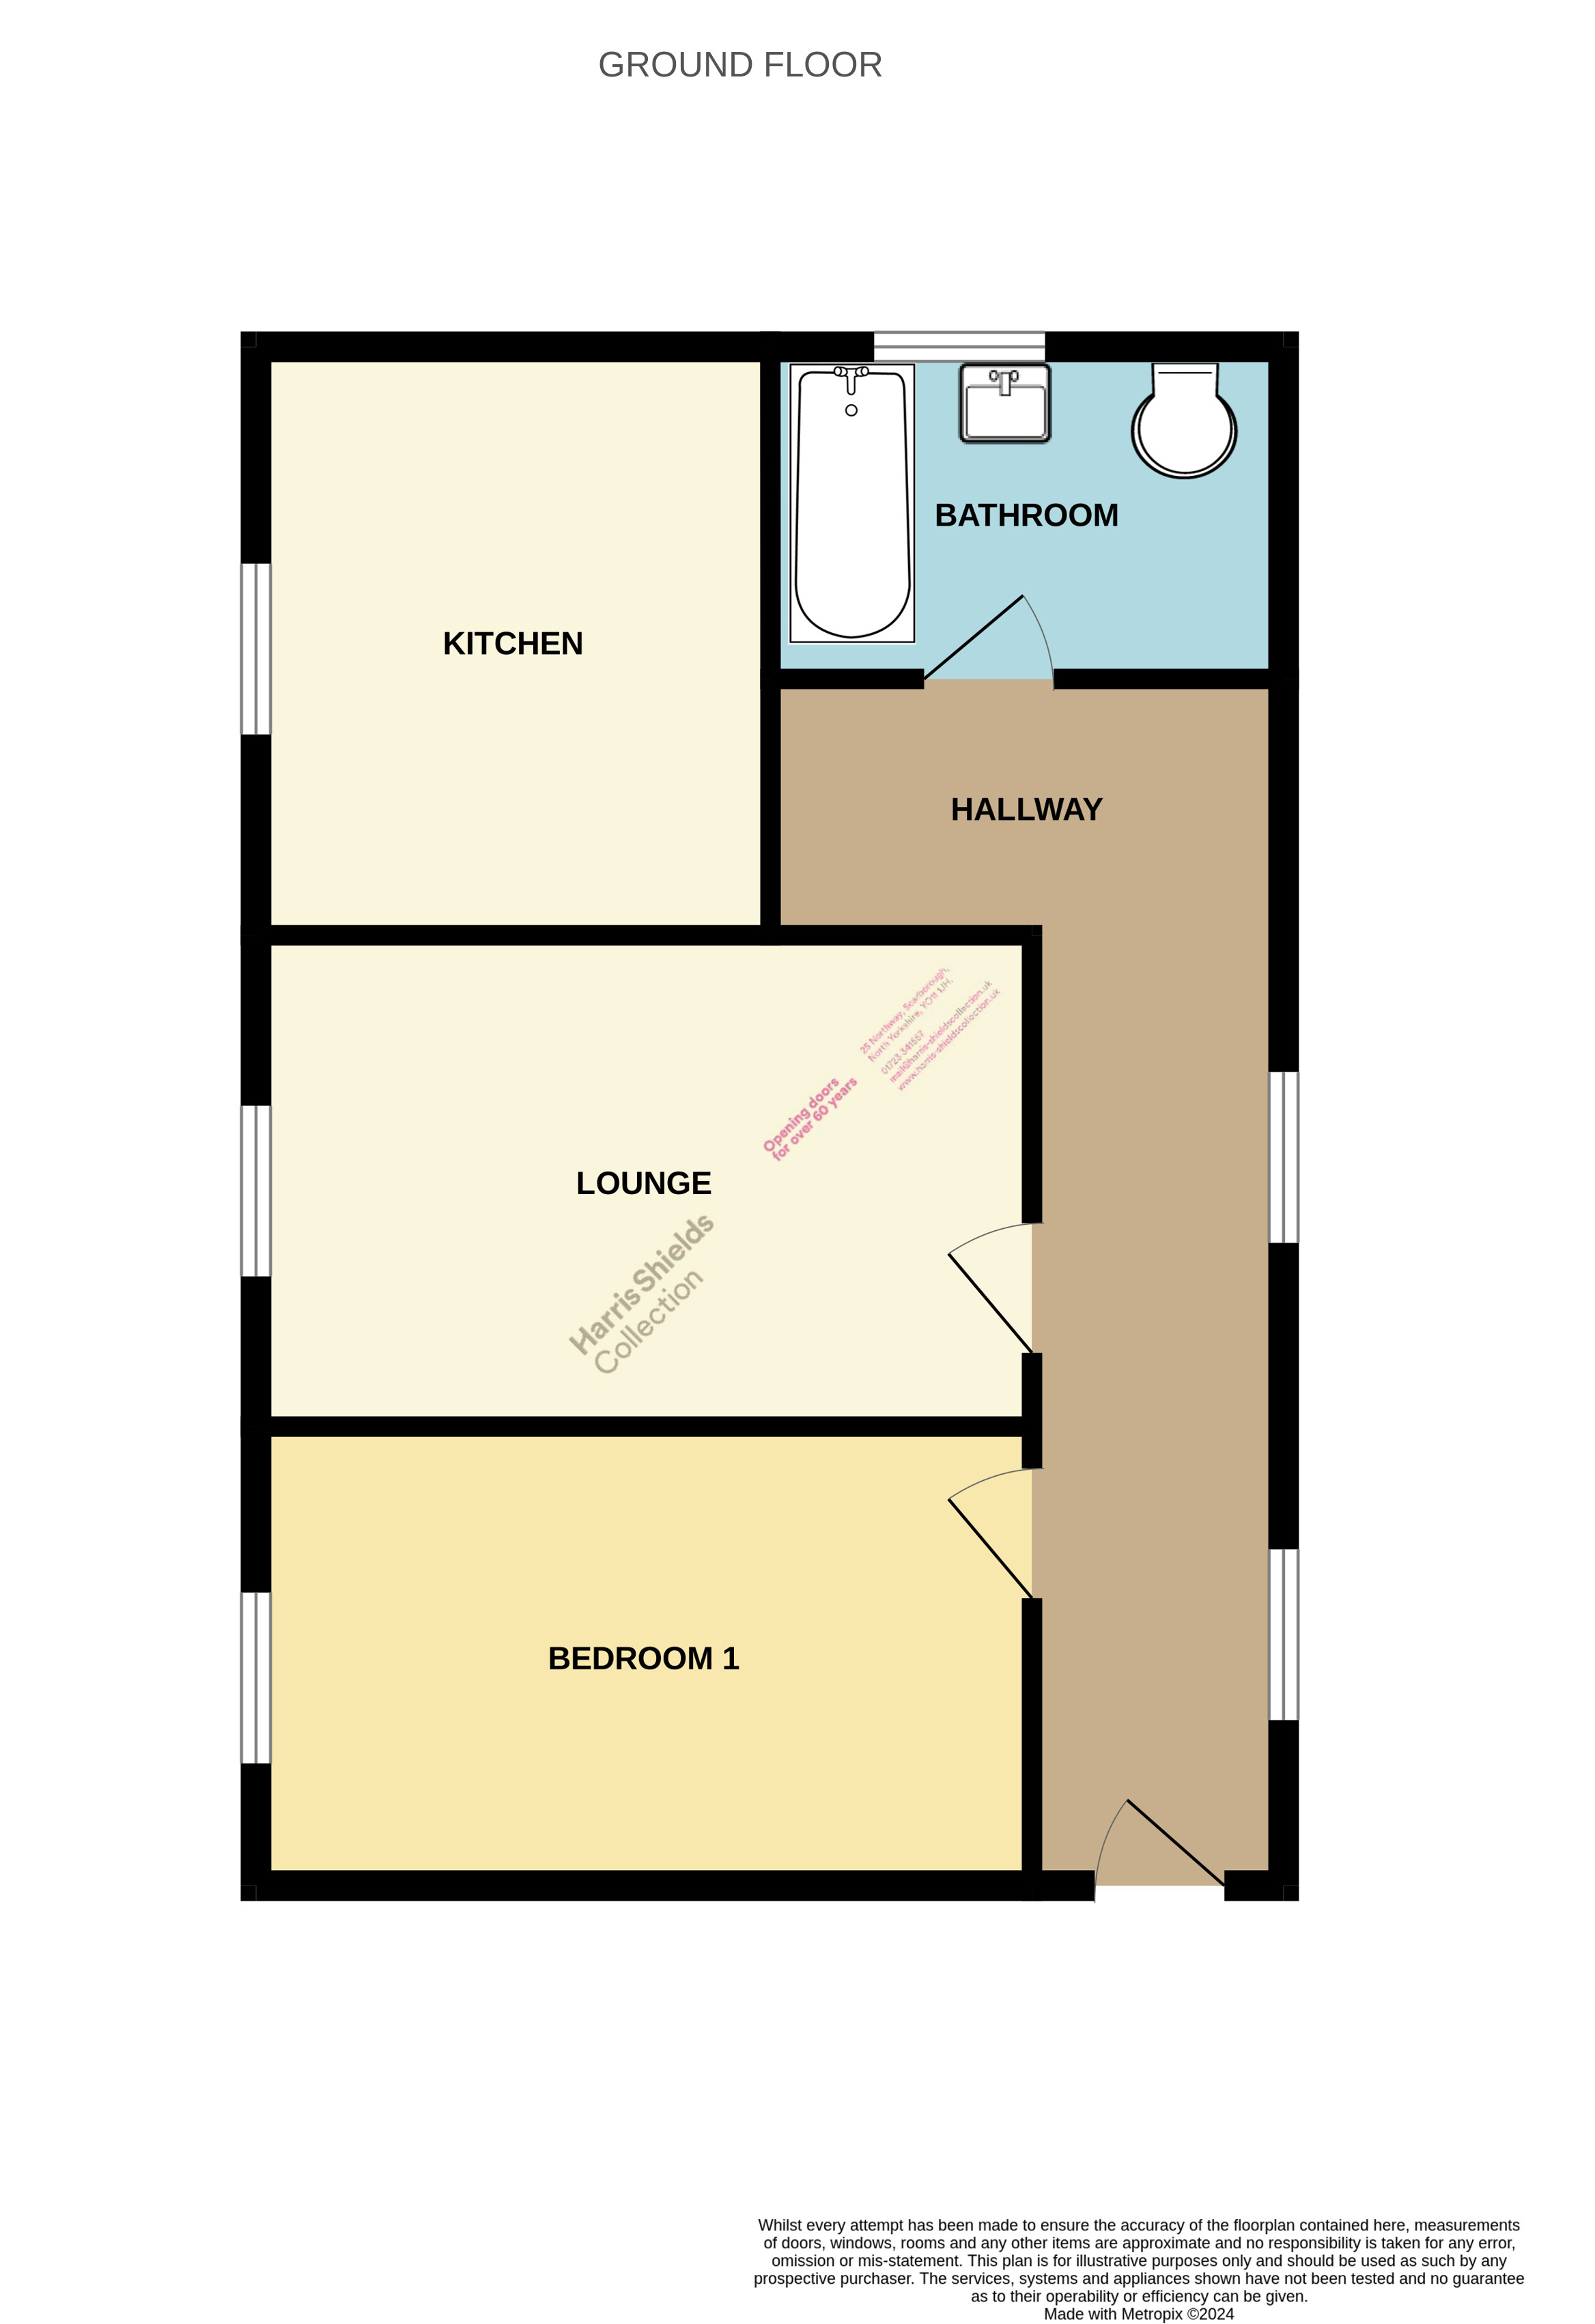 1 bed apartment to rent in West Street, Scarborough - Property floorplan